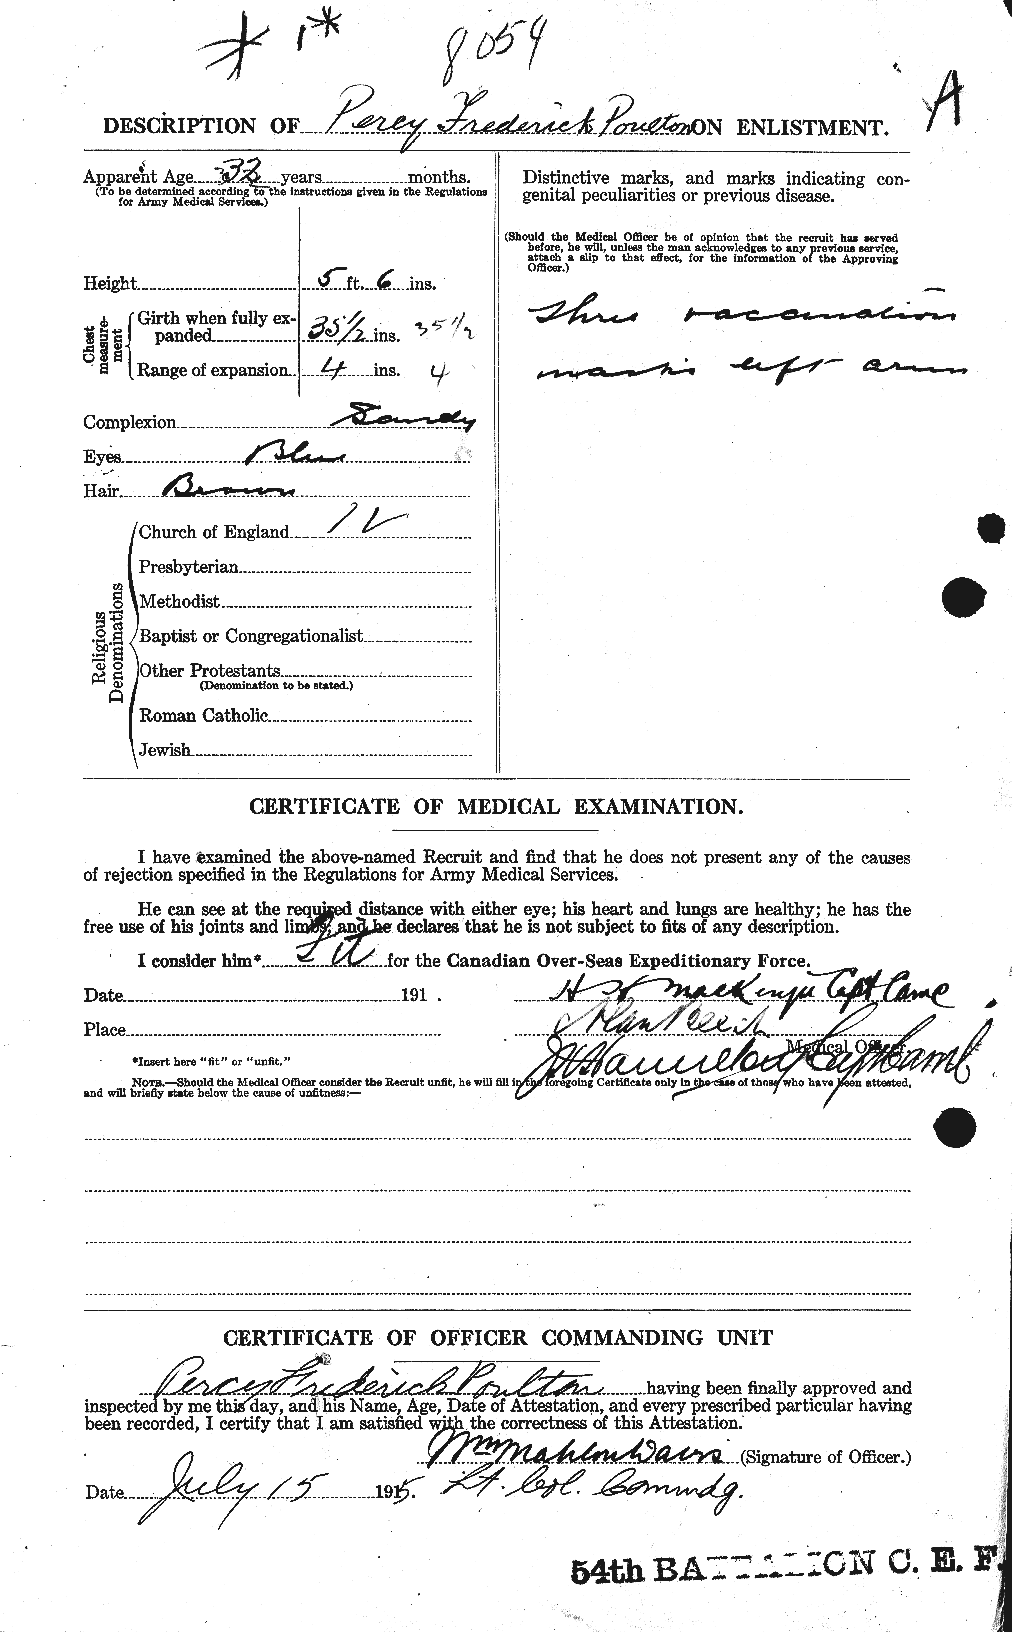 Personnel Records of the First World War - CEF 584941b